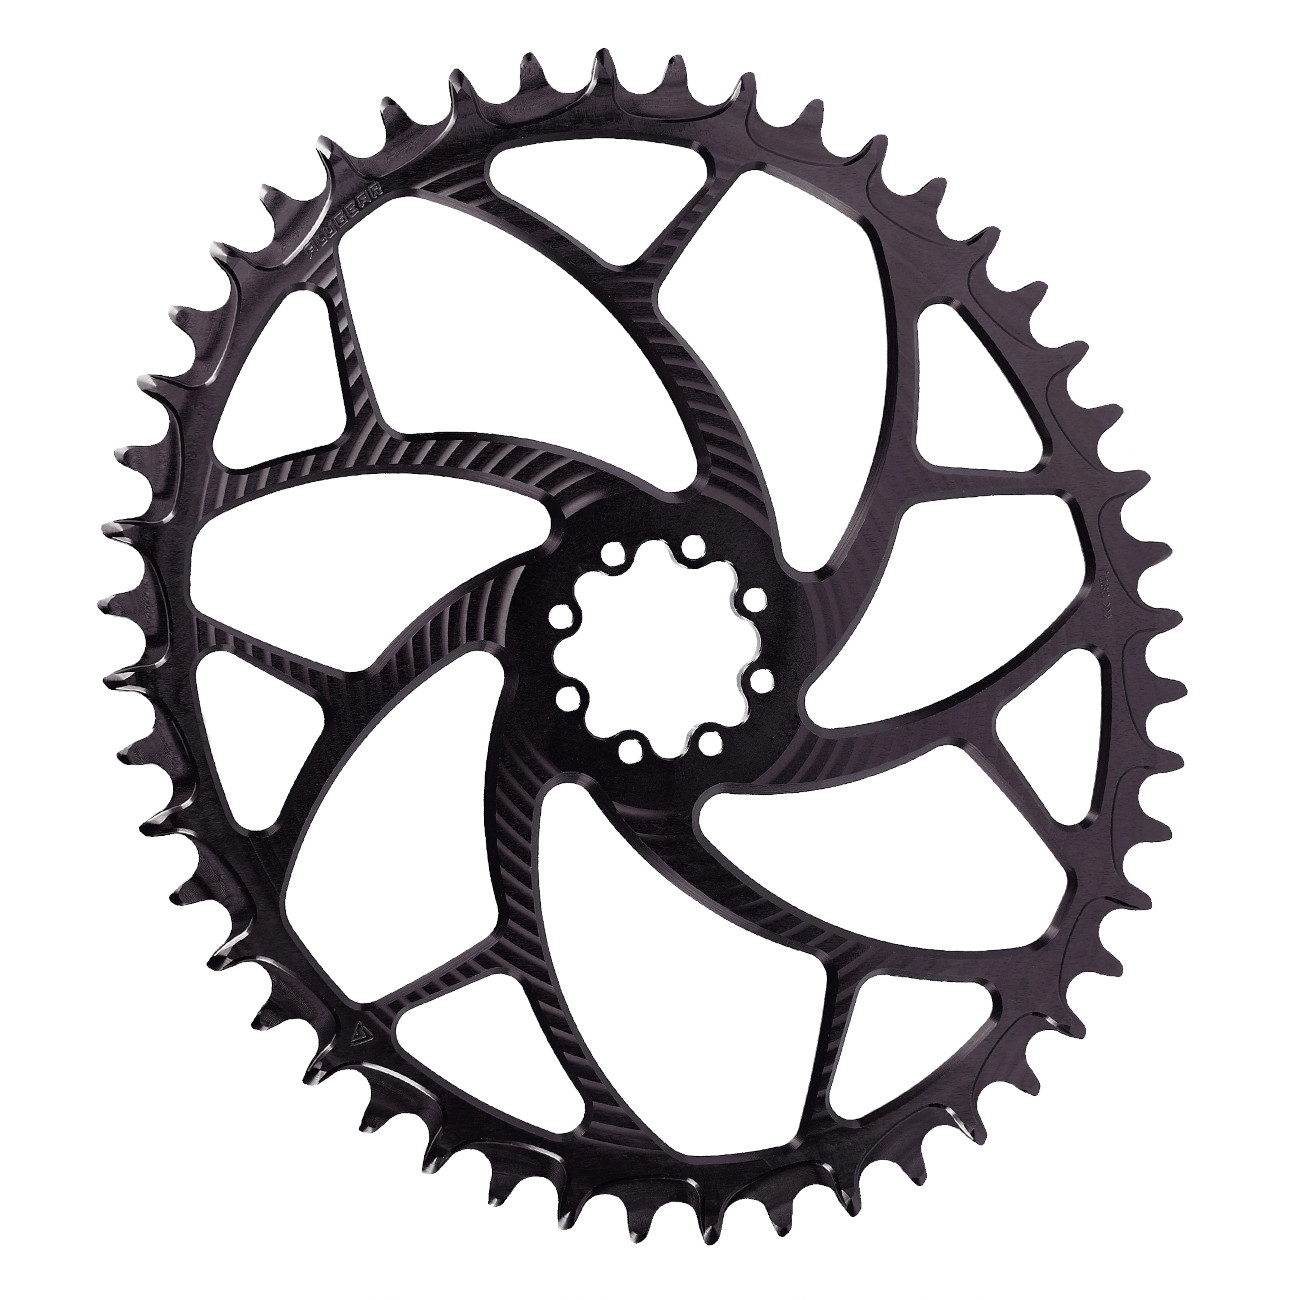 Productfoto van Alugear ELM Narrow Wide Road / Gravel Chainring - Oval - for 1x SRAM 8-Bolt Direct Mount